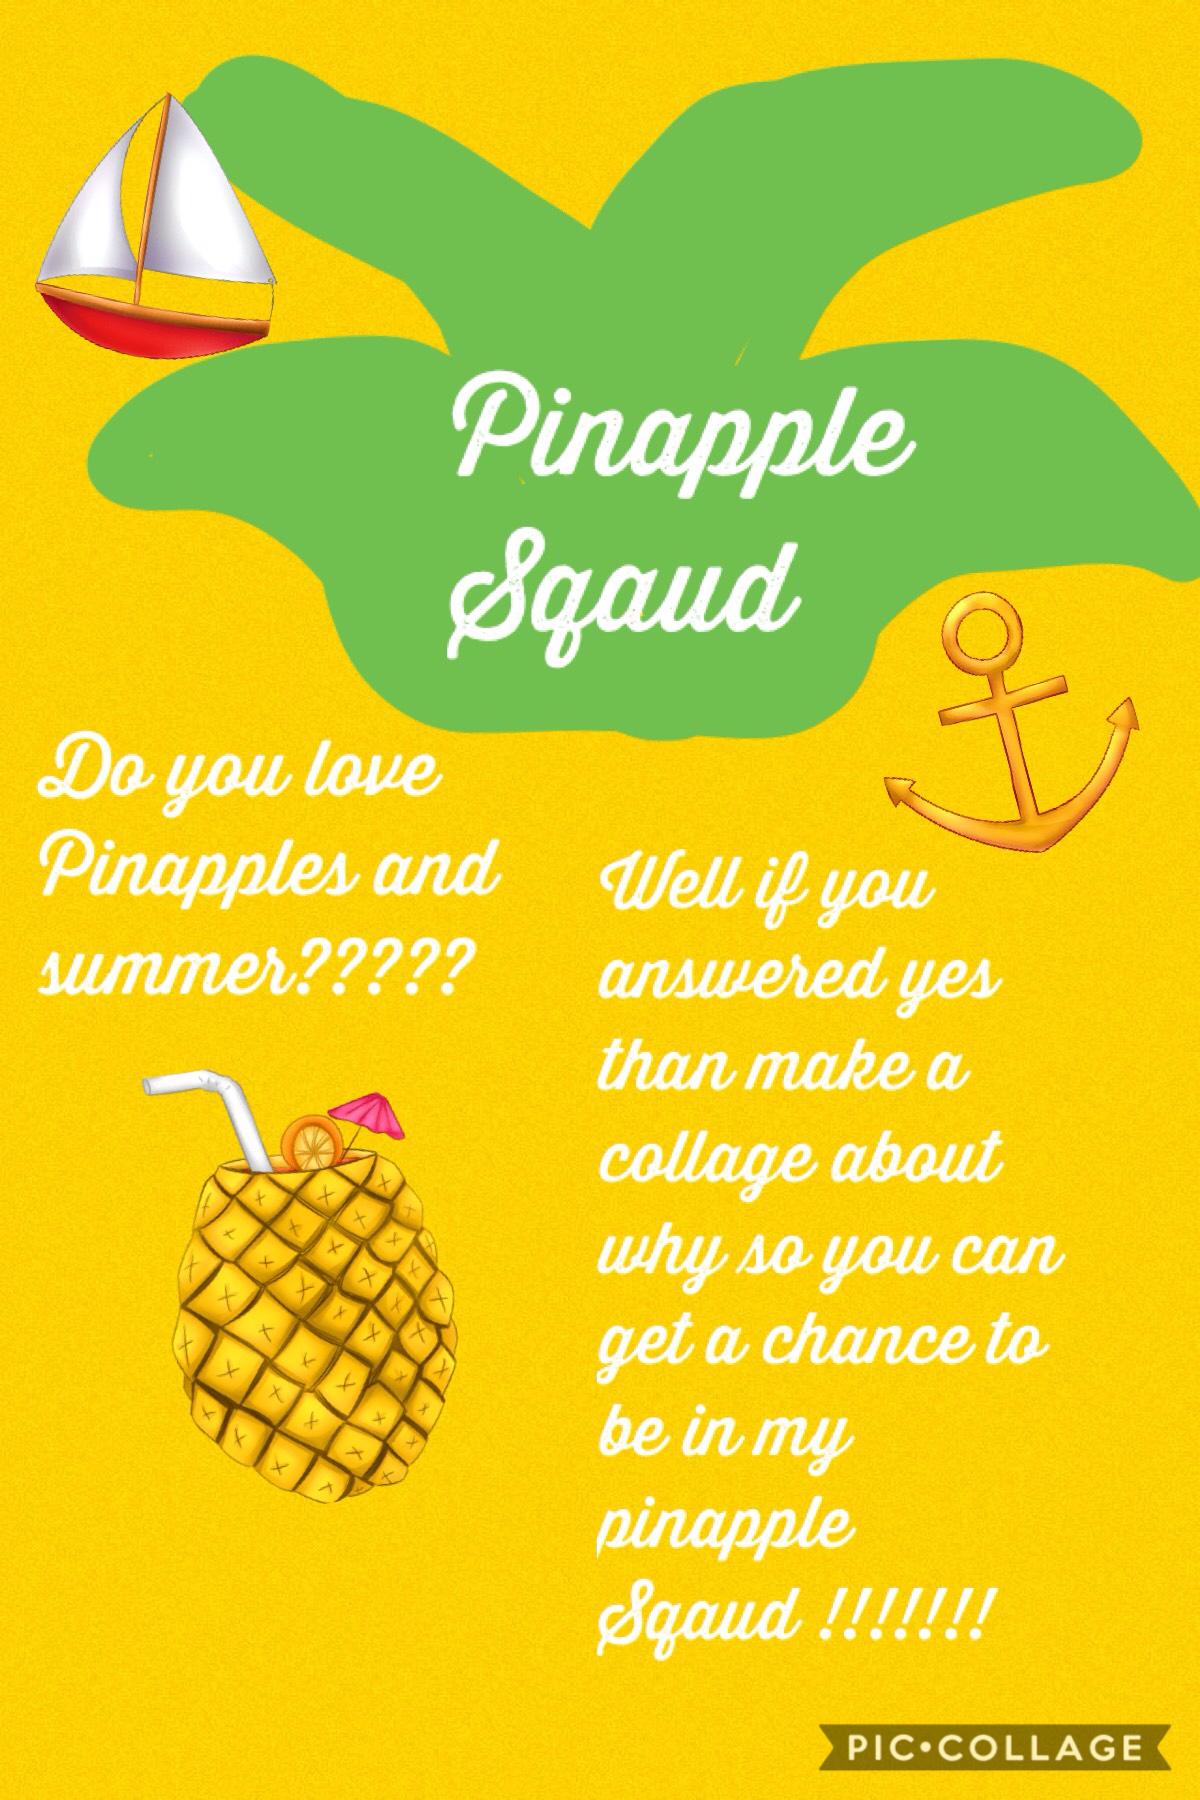 Tap


This group can have at least 10 members and make a collage with how much love you have for summer and Pinapples 